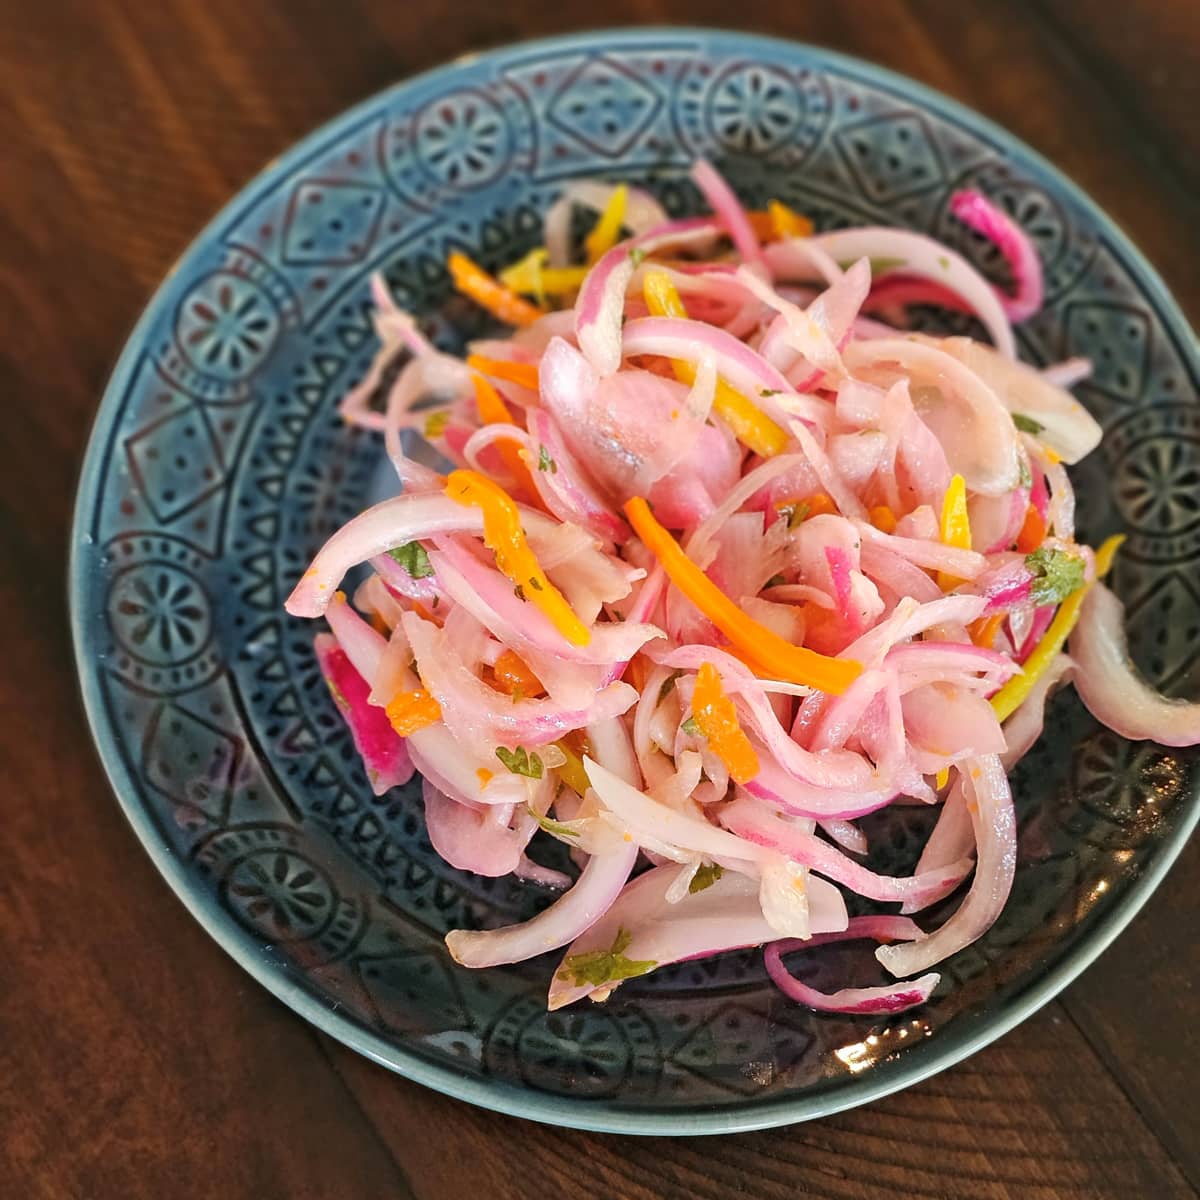 Sliced bell peppers and onions on a plate.